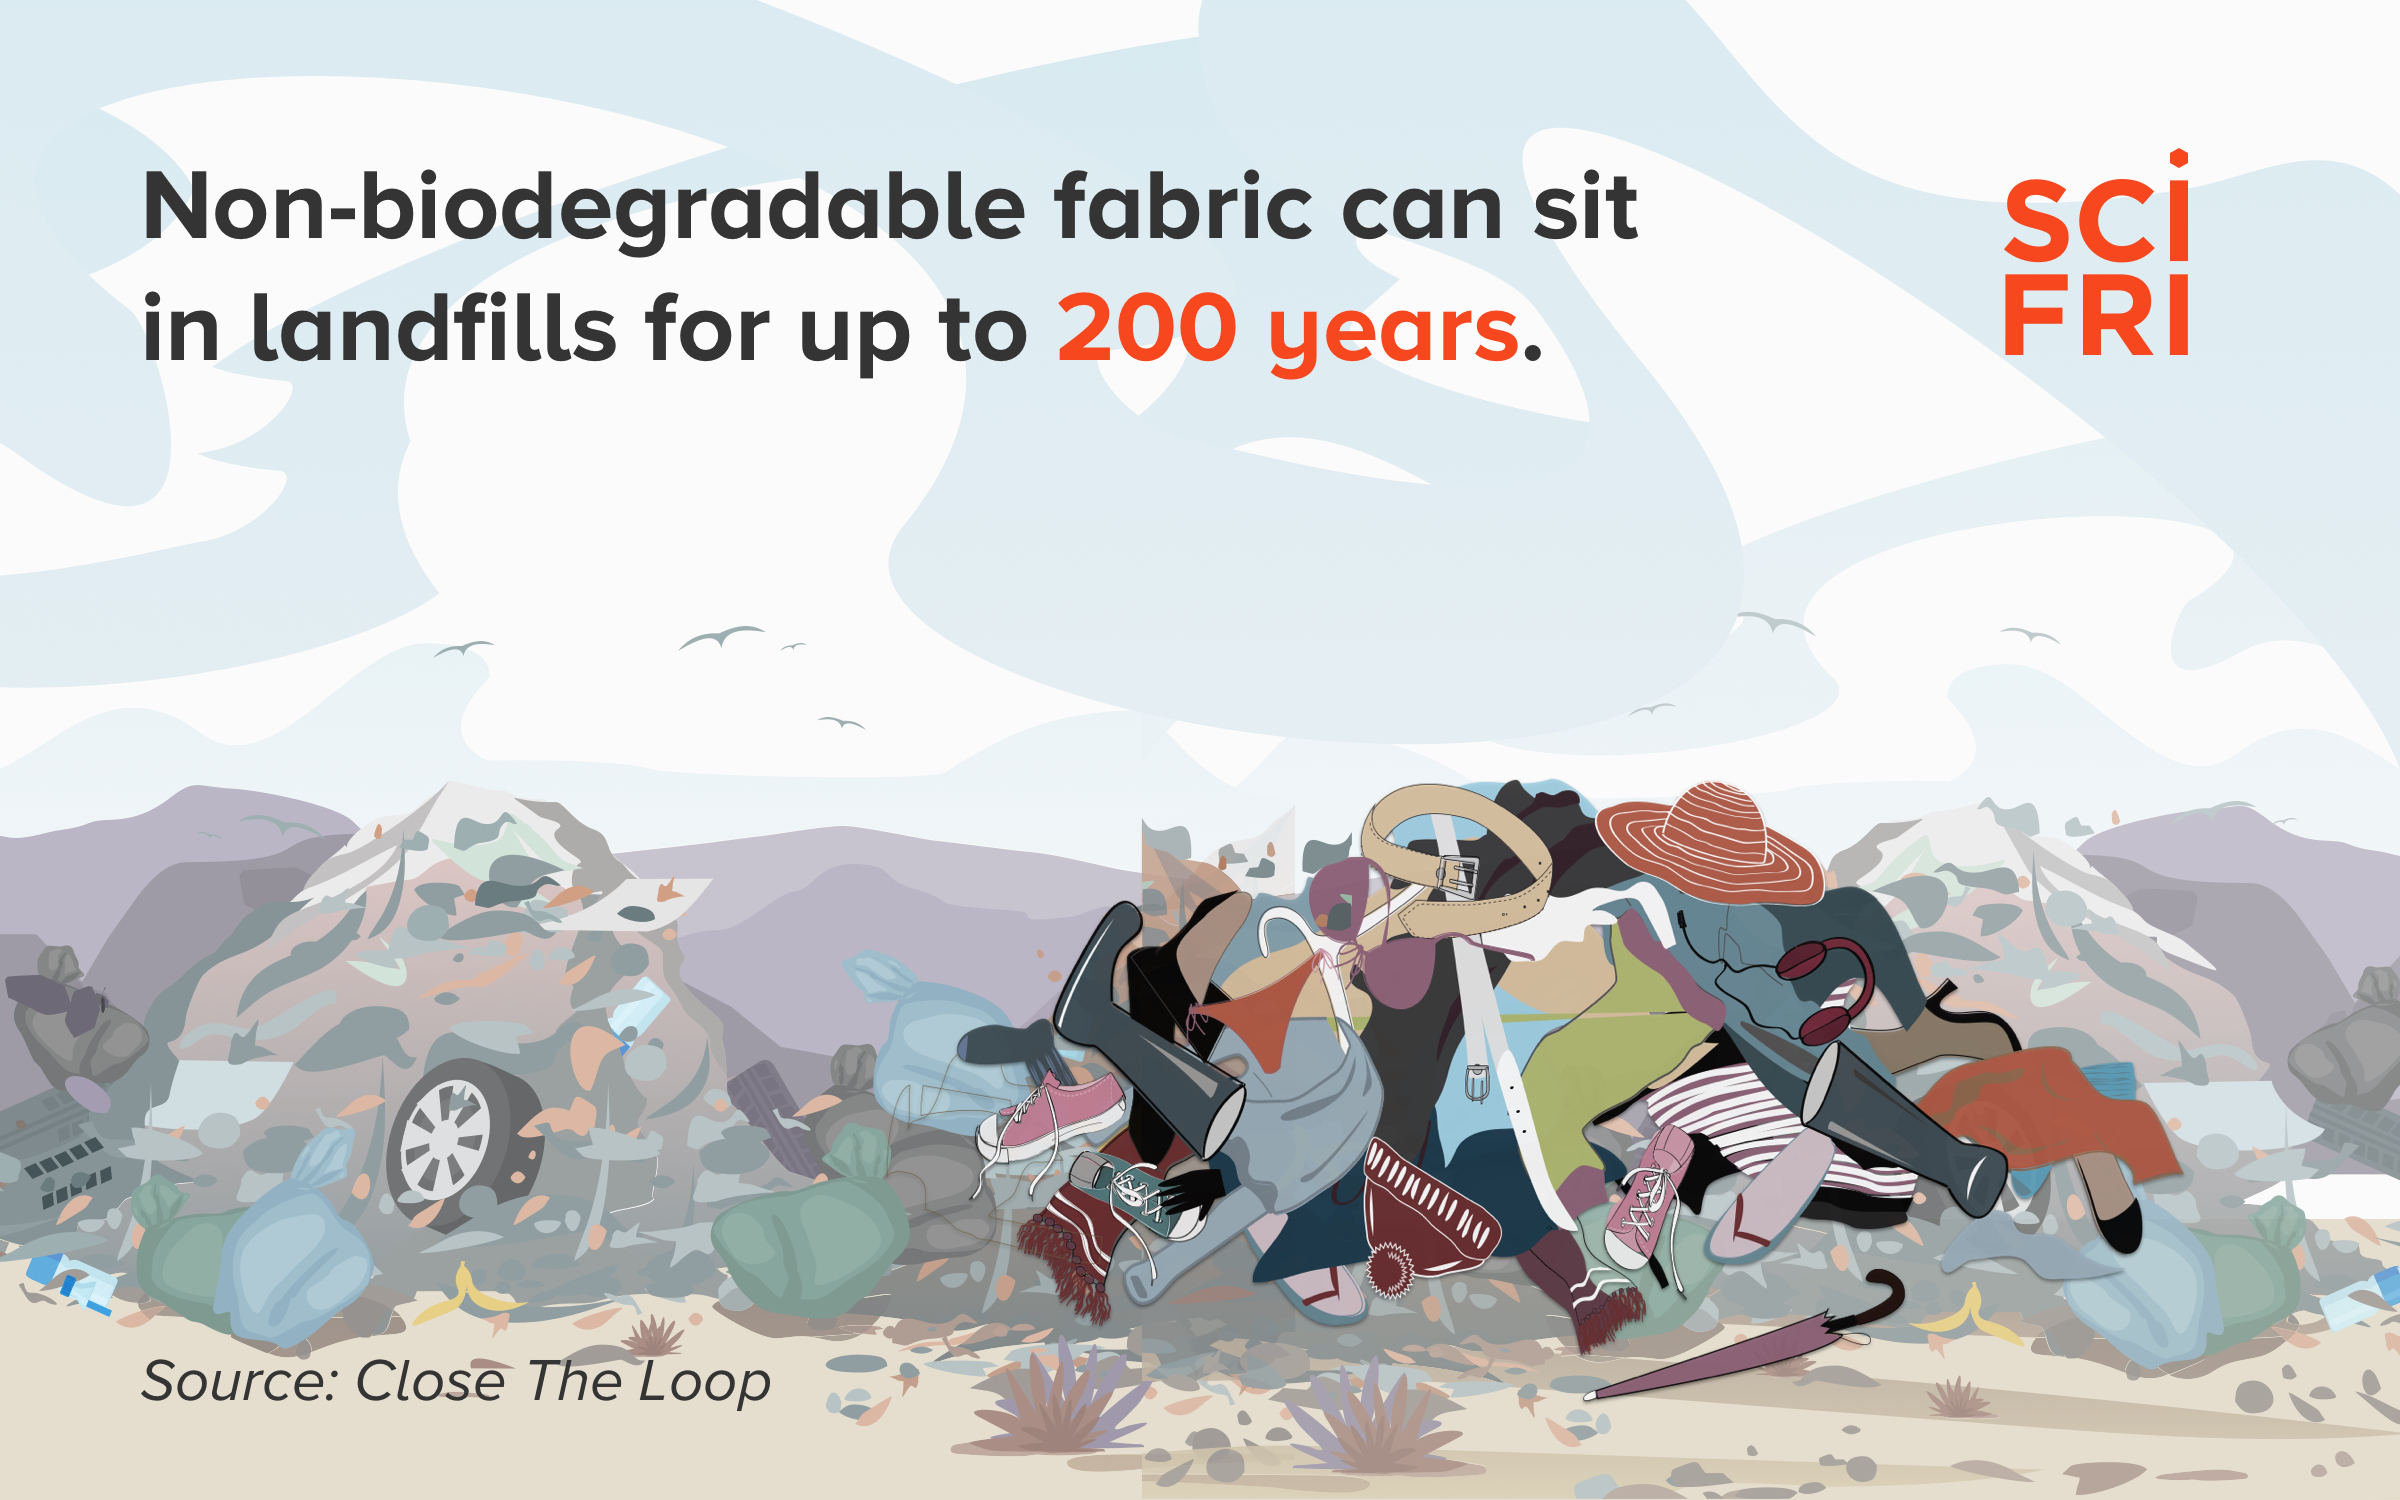 cartoon image of a landfill with text that says "non-biodegradeable fabric can sit in landfills for up to 200 years" and a cloudy sky in the background